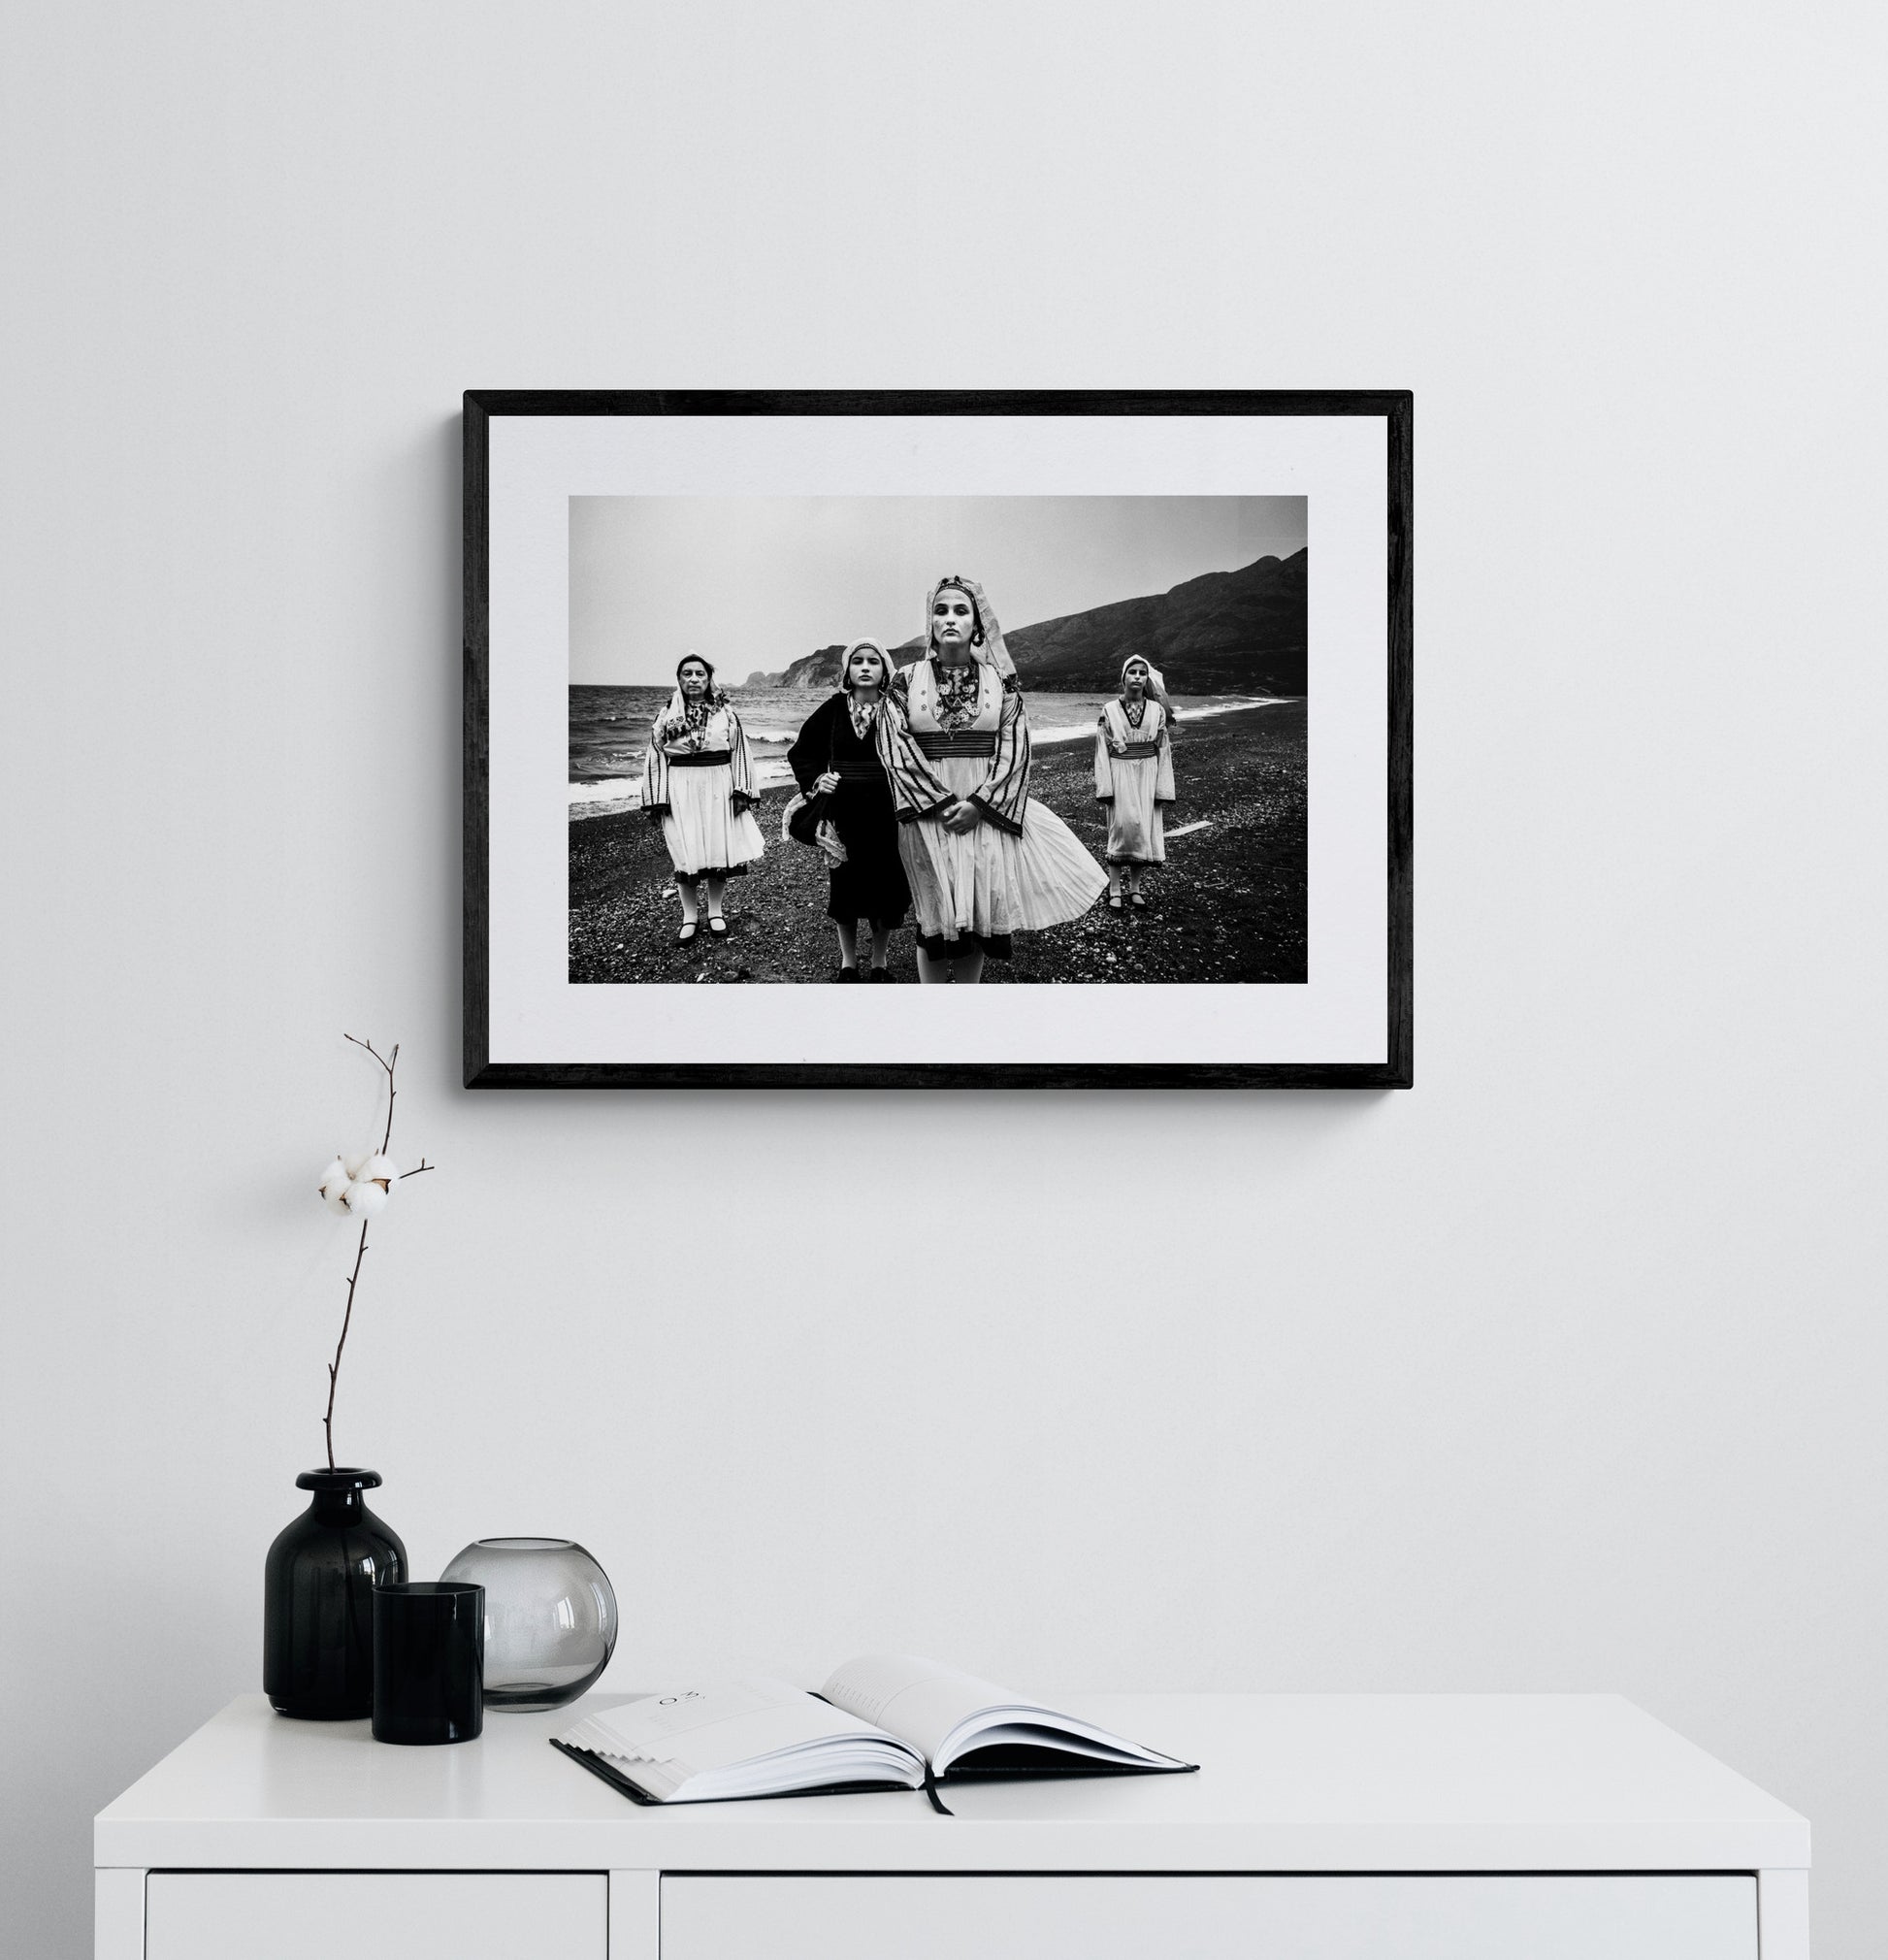 Black and White Photography Wall Art Greece | Costumes of Tilos island at sea Dodecanese Greece by George Tatakis - single framed photo